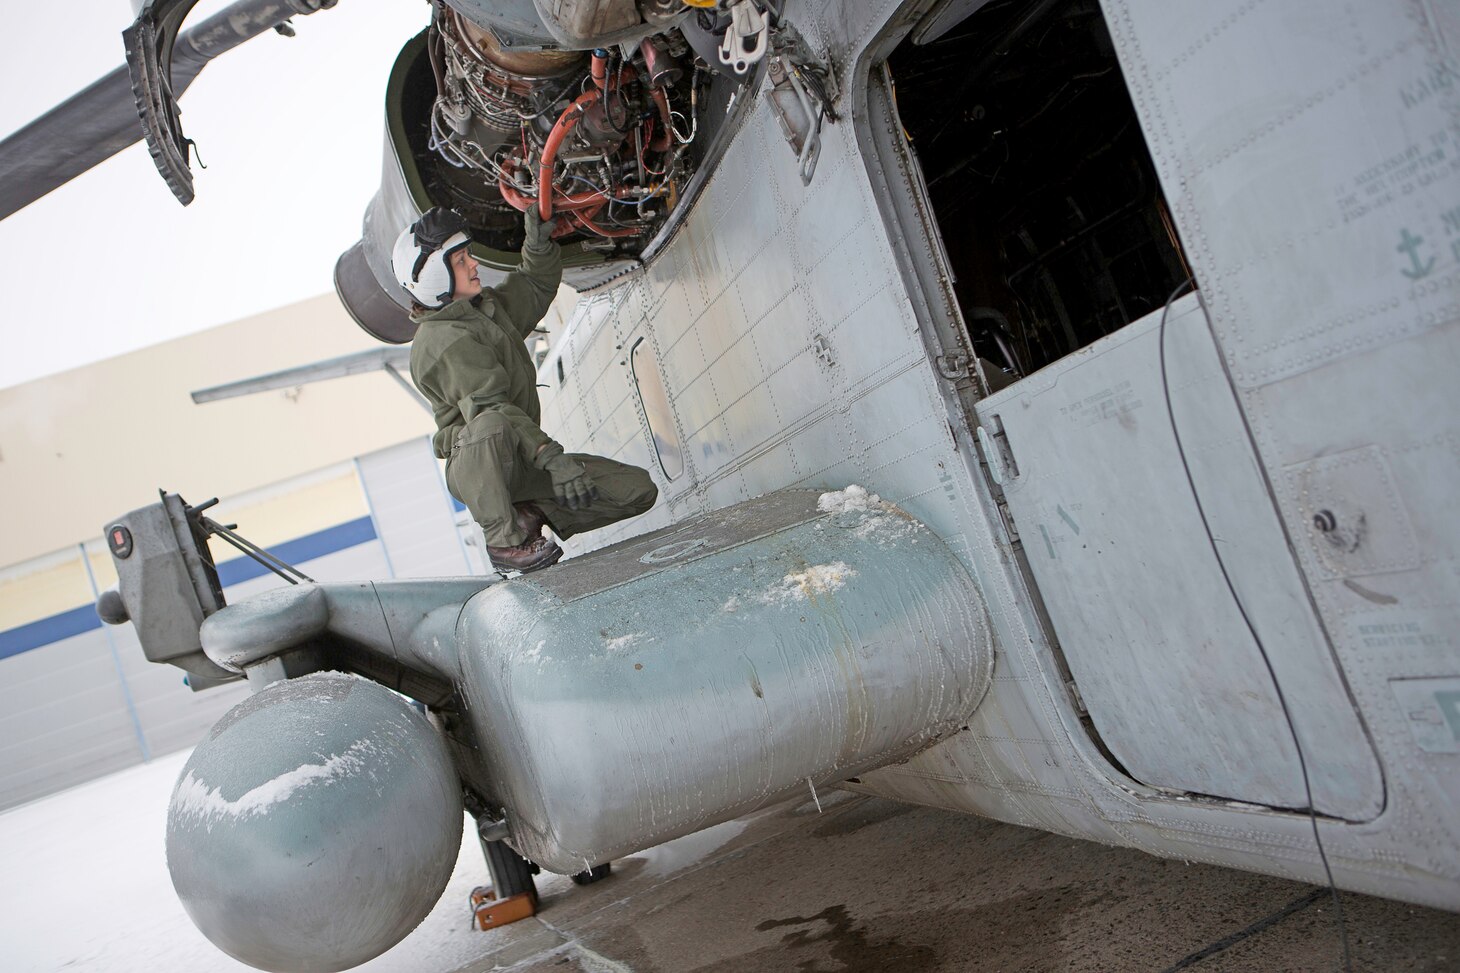 U.S. Marine 1stLt. Whitley Noel, a pilot with Marine Heavy Helicopter Squadron 464 conducts a pre-flight inspection on a CH-53E Super Stallion helicopter before a flight in Brunswick, ME., January 23, 2018. Marines with HMH-464 are participating in a training exercise in Brunswick, ME., and are conducting mountainous and maritime operations to get accustomed to training and operating in cold weather environments.